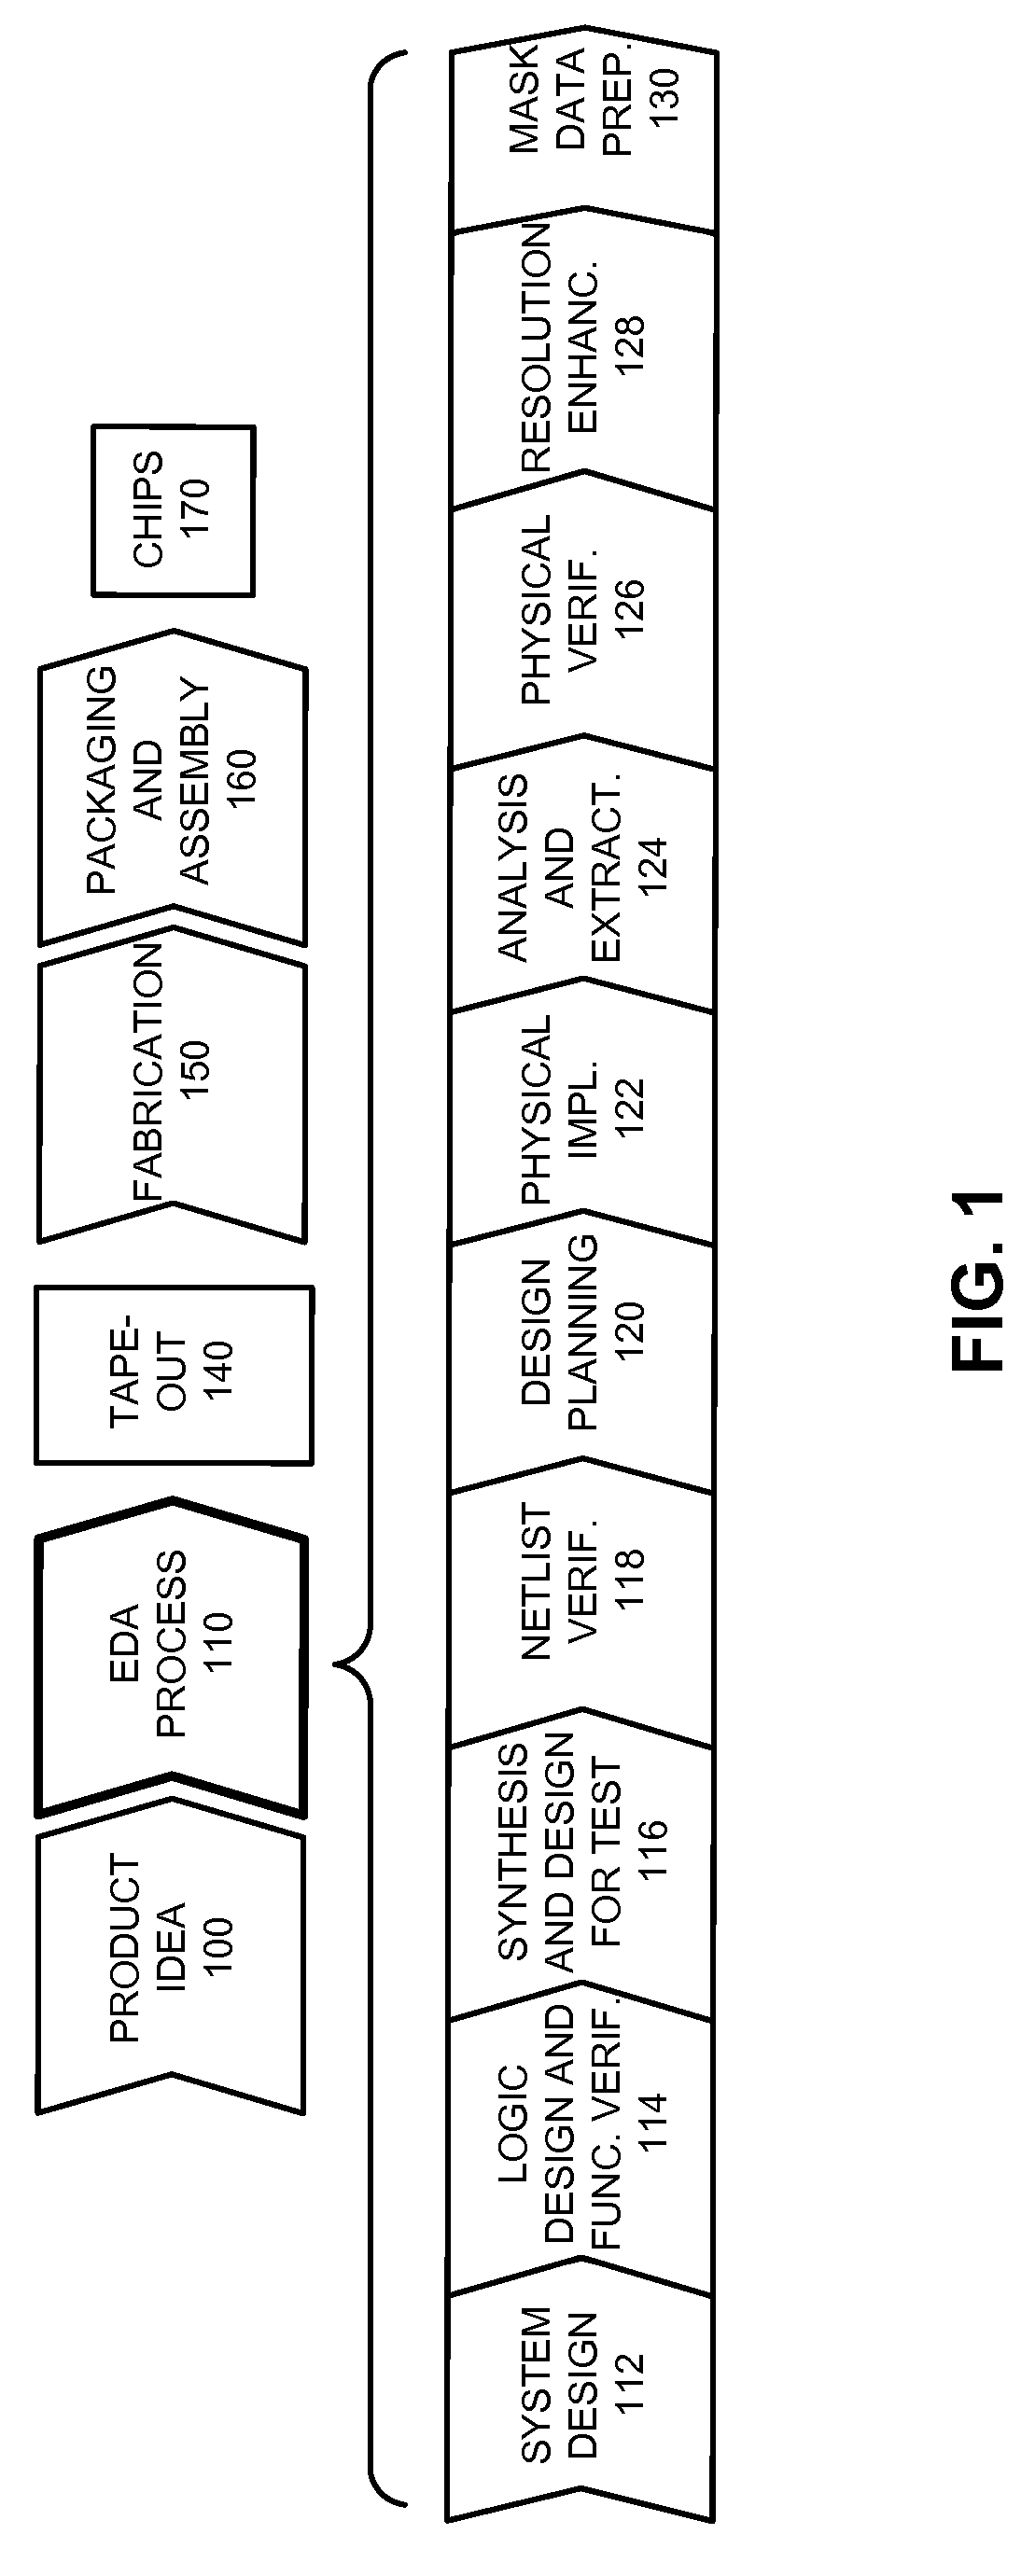 Incremental concurrent processing for efficient computation of high-volume layout data